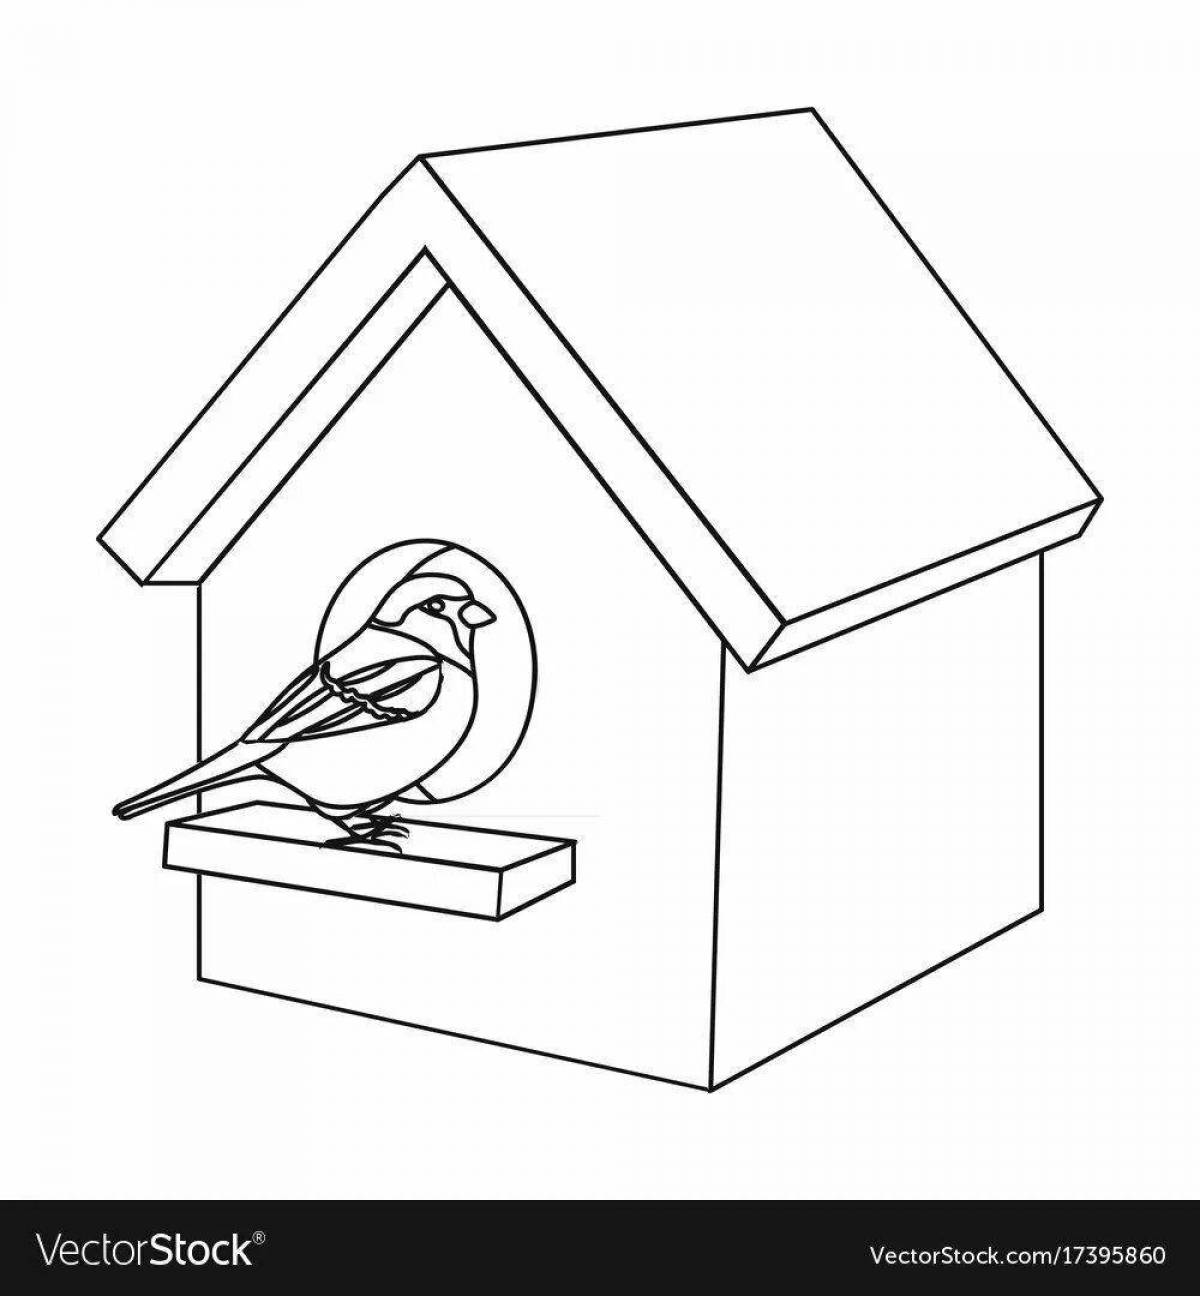 Cheerful birdhouse coloring for children 3-4 years old